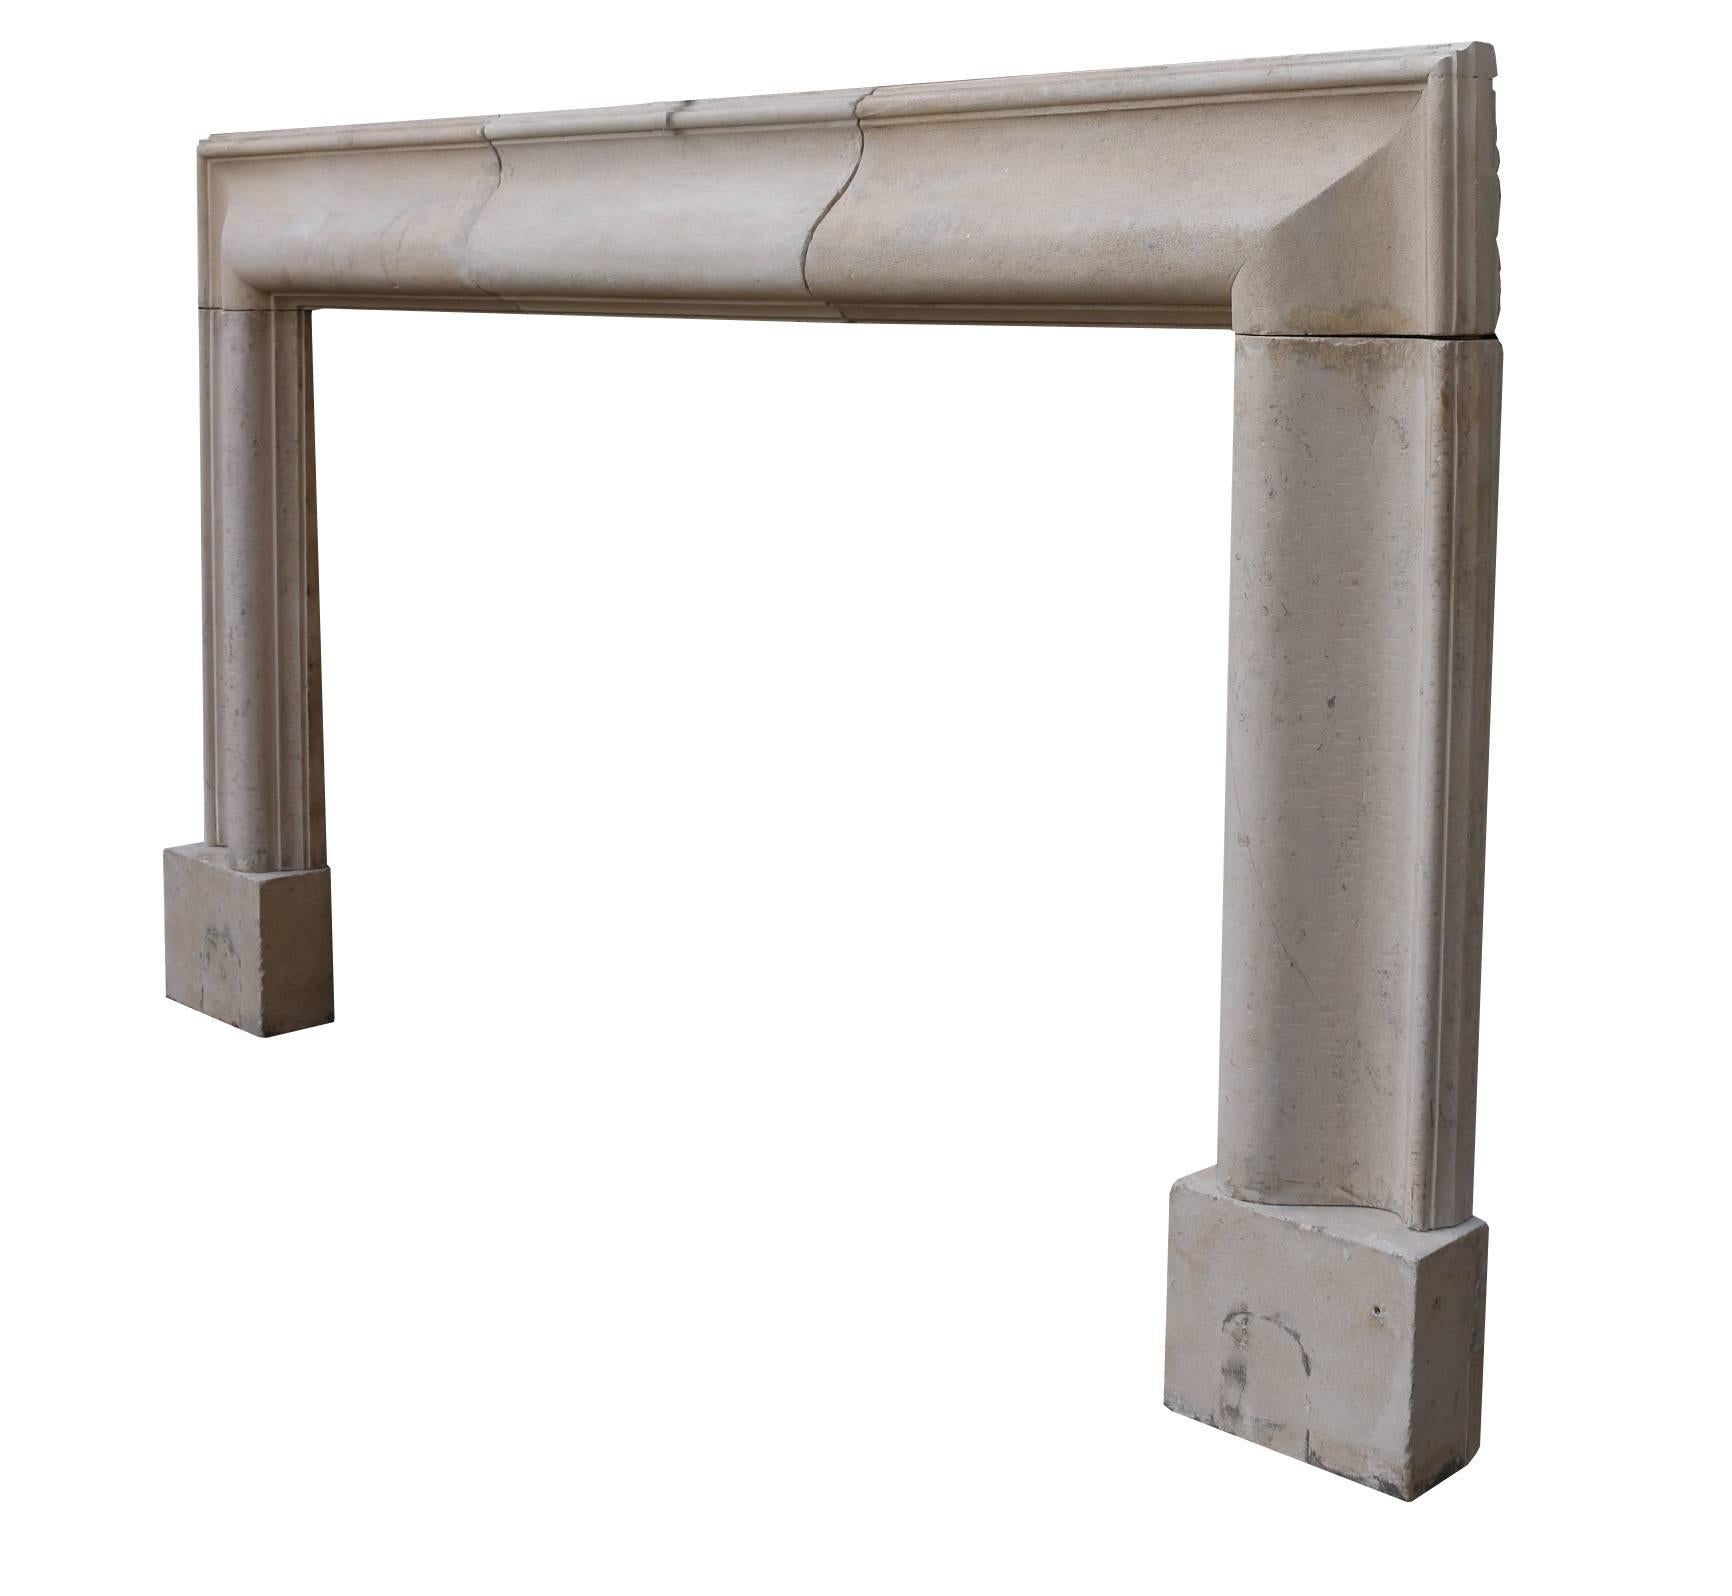 This fire surround comes with a later limestone fender.
Excellent original condition
Opening Height 91 cm
Opening Width 144.5 cm
Width Between Legs 192.5 cm
Fender
Height 12 cm
Length 172 cm
Depth 37 cm